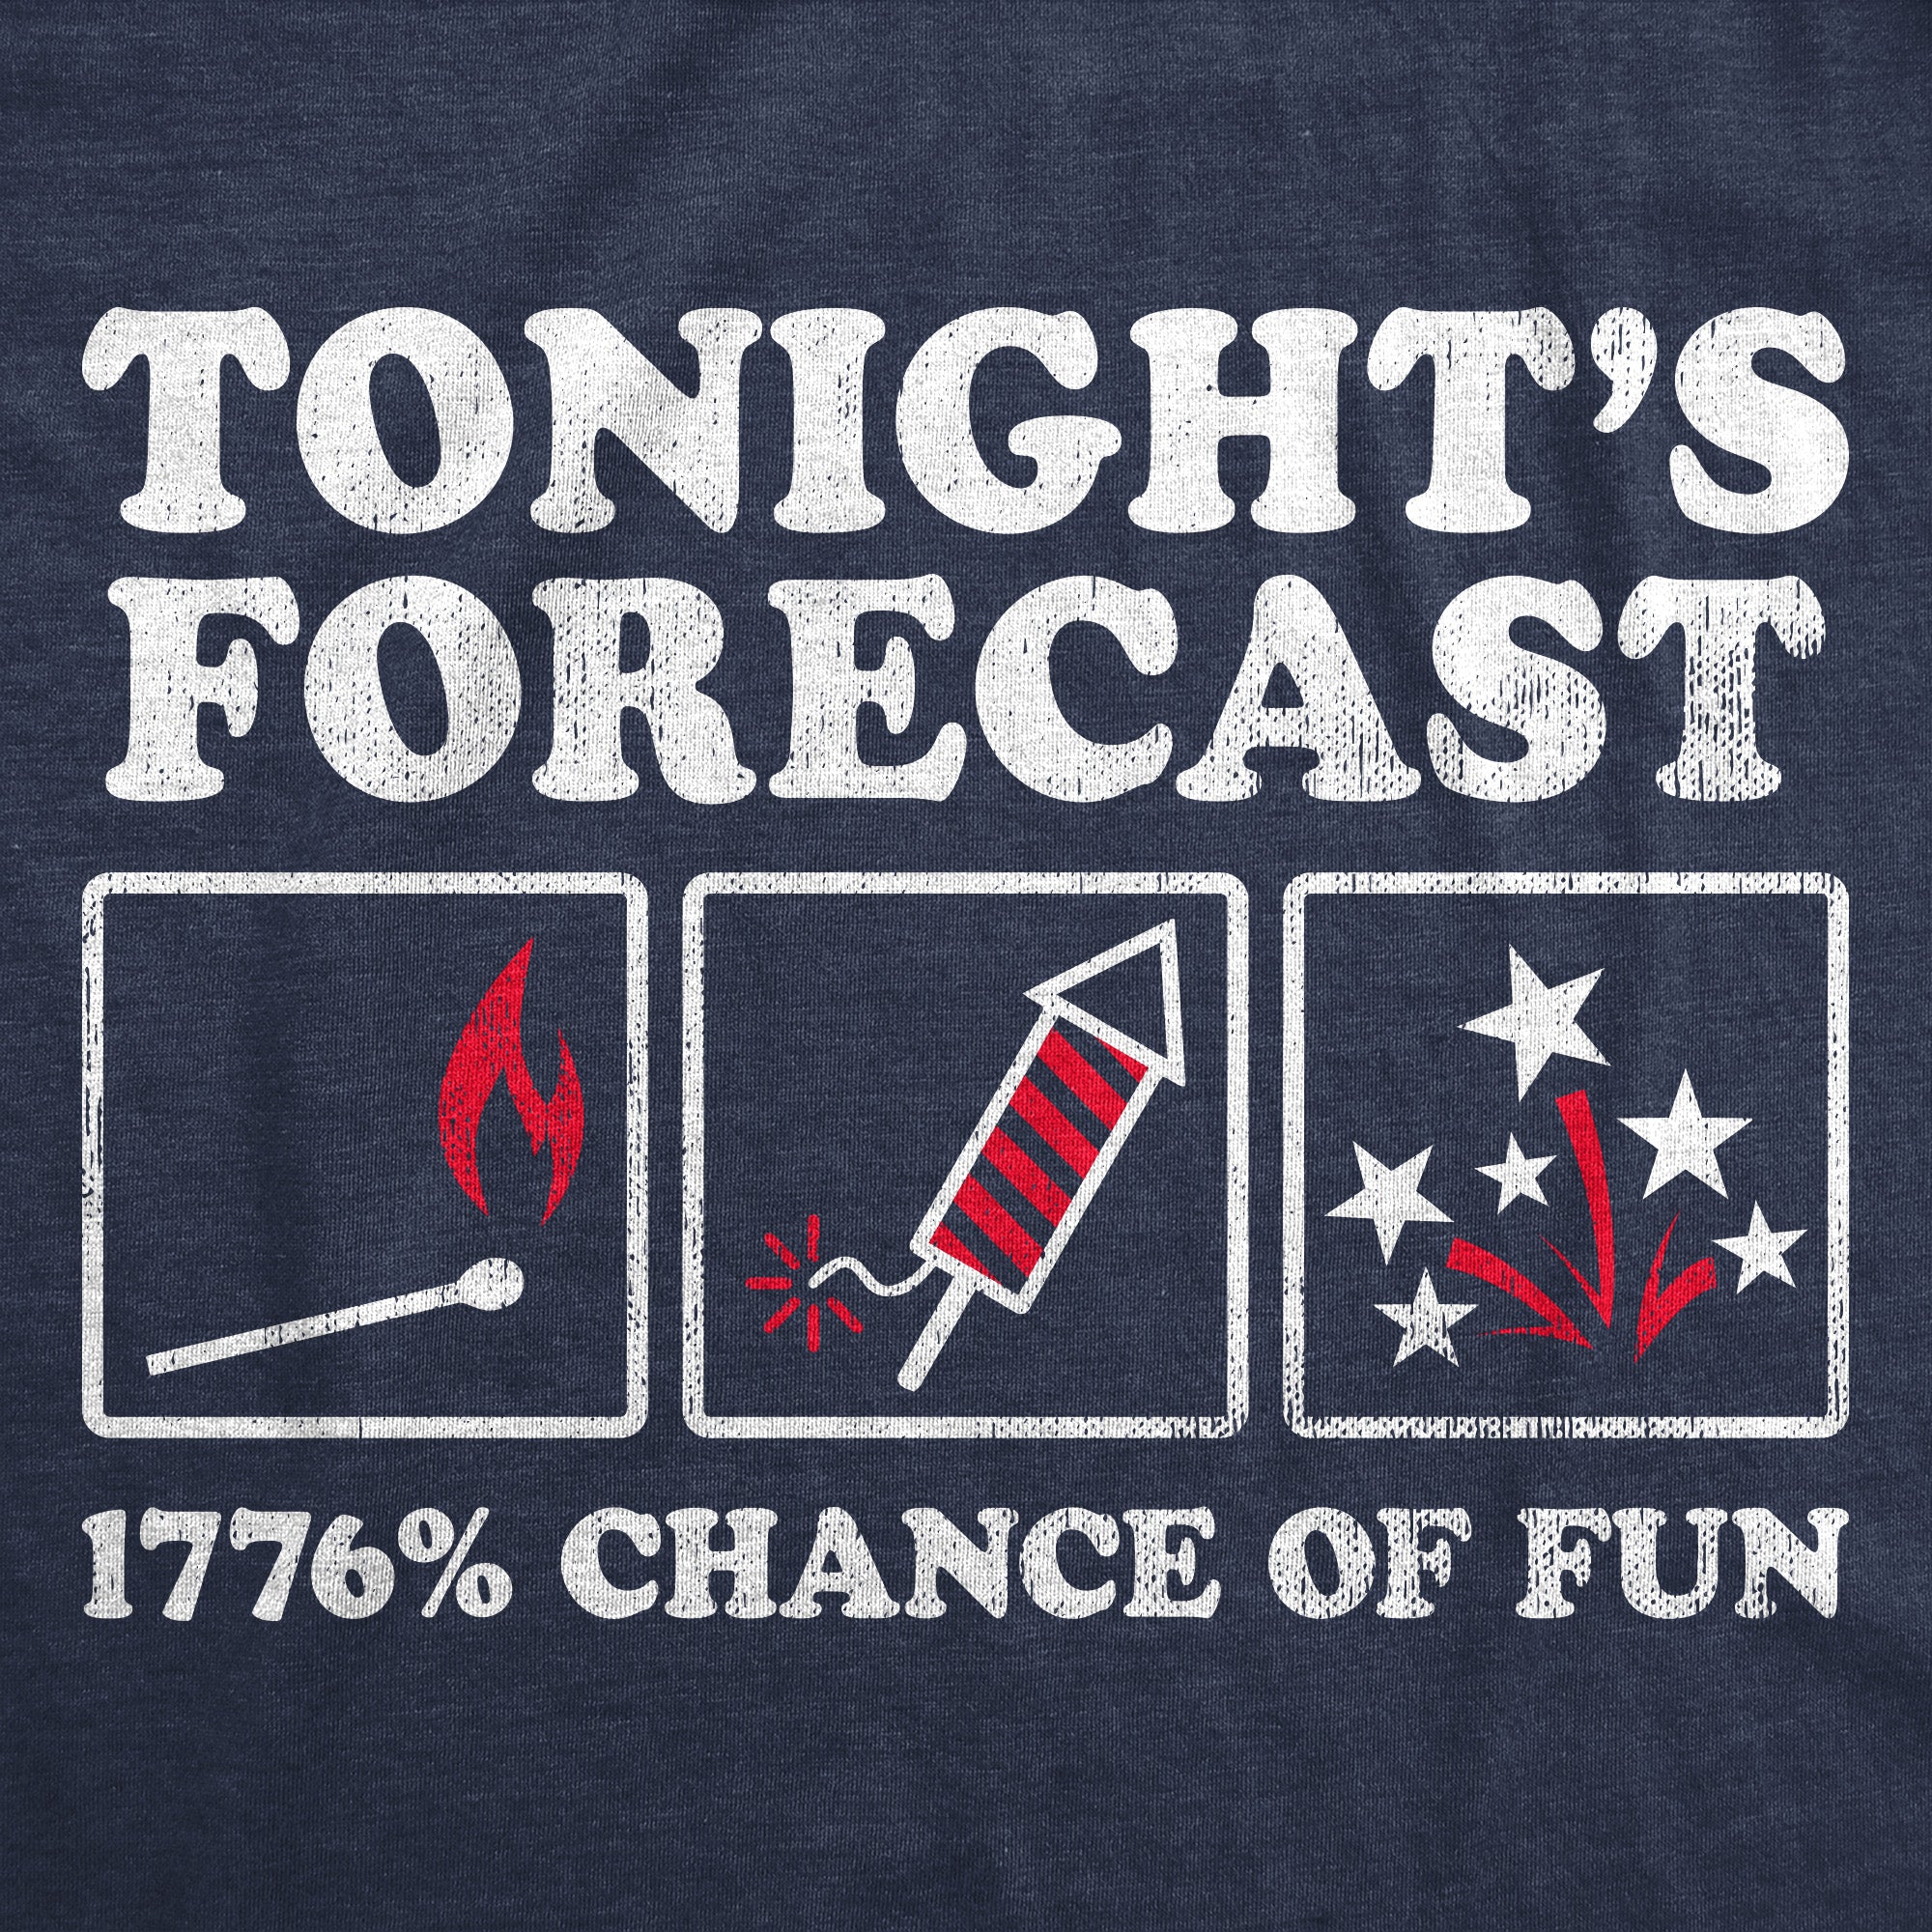 Funny Heather Navy - FORECAST Tonights Forecast 1776 Percent Chance Of Fun Womens T Shirt Nerdy Fourth of July Sarcastic Tee